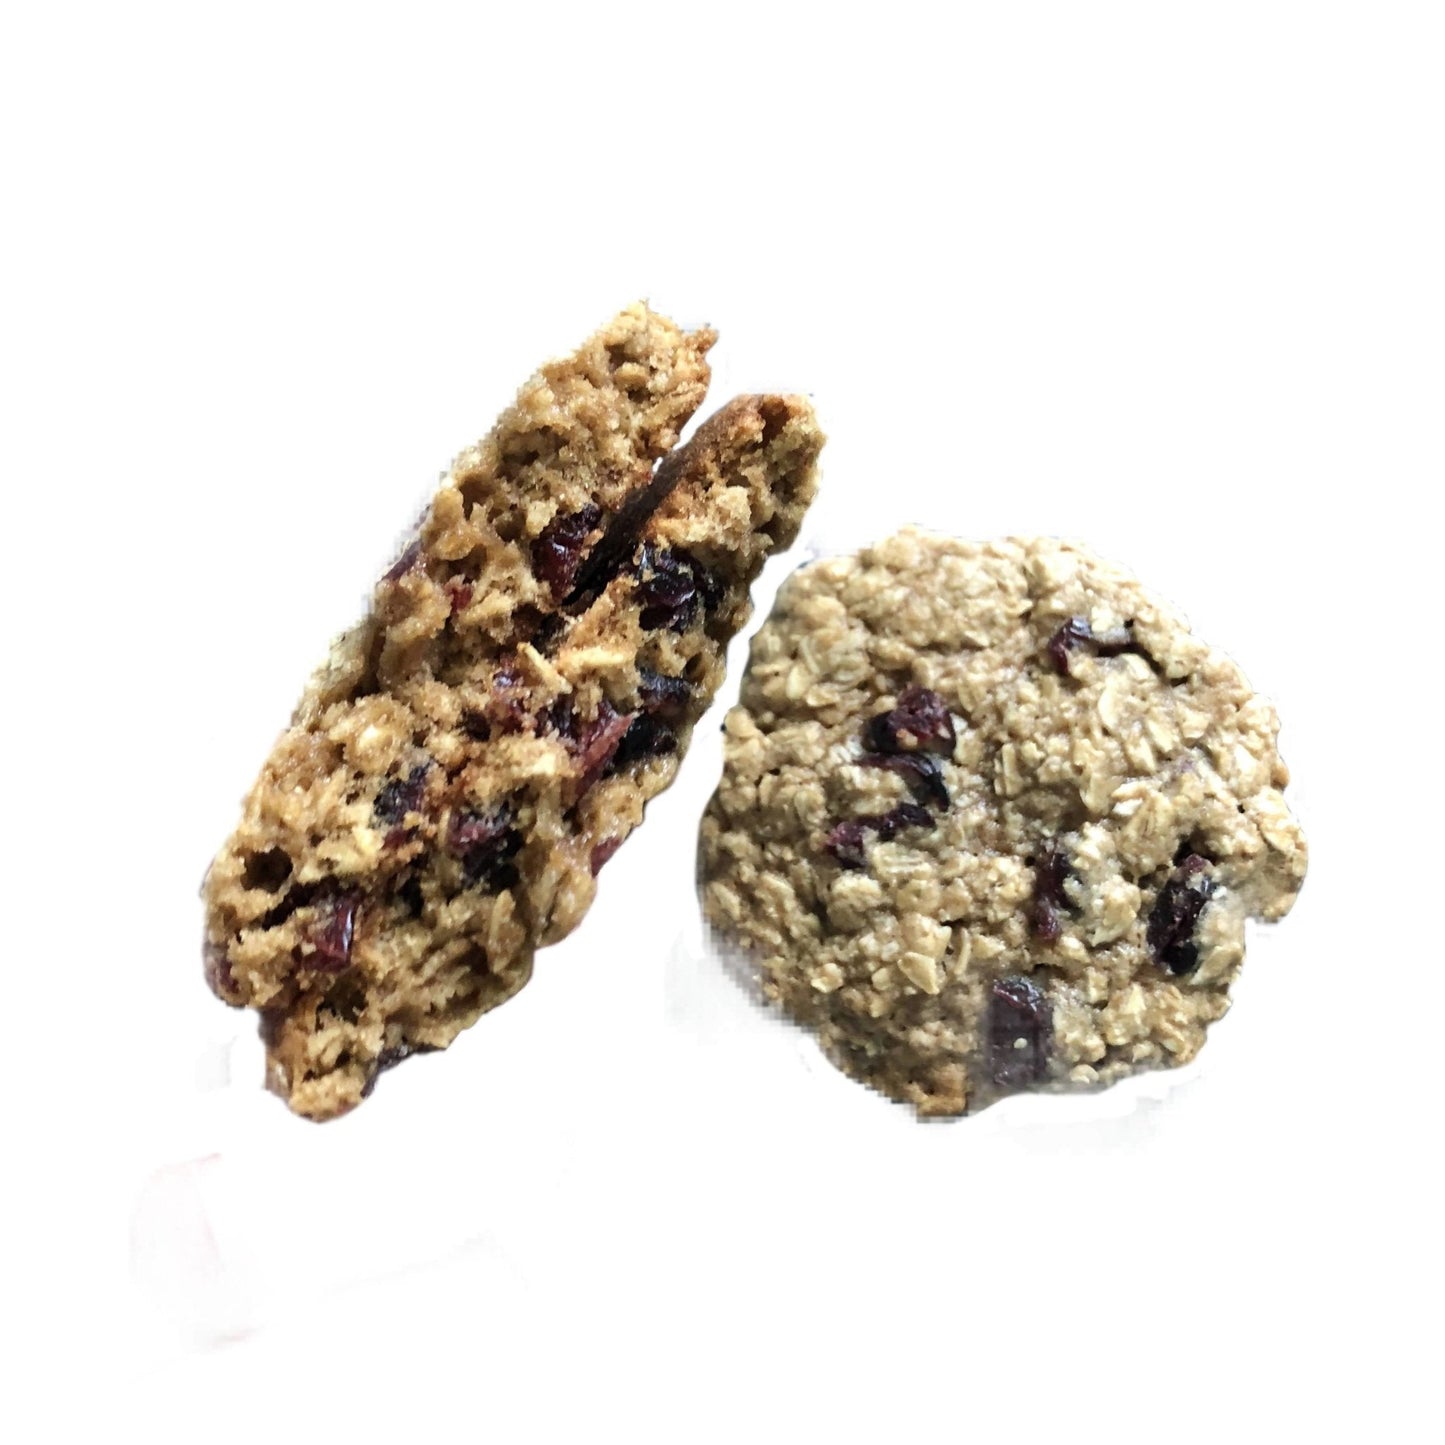 Oatmeal Cranberry Cookies - 48 Pieces